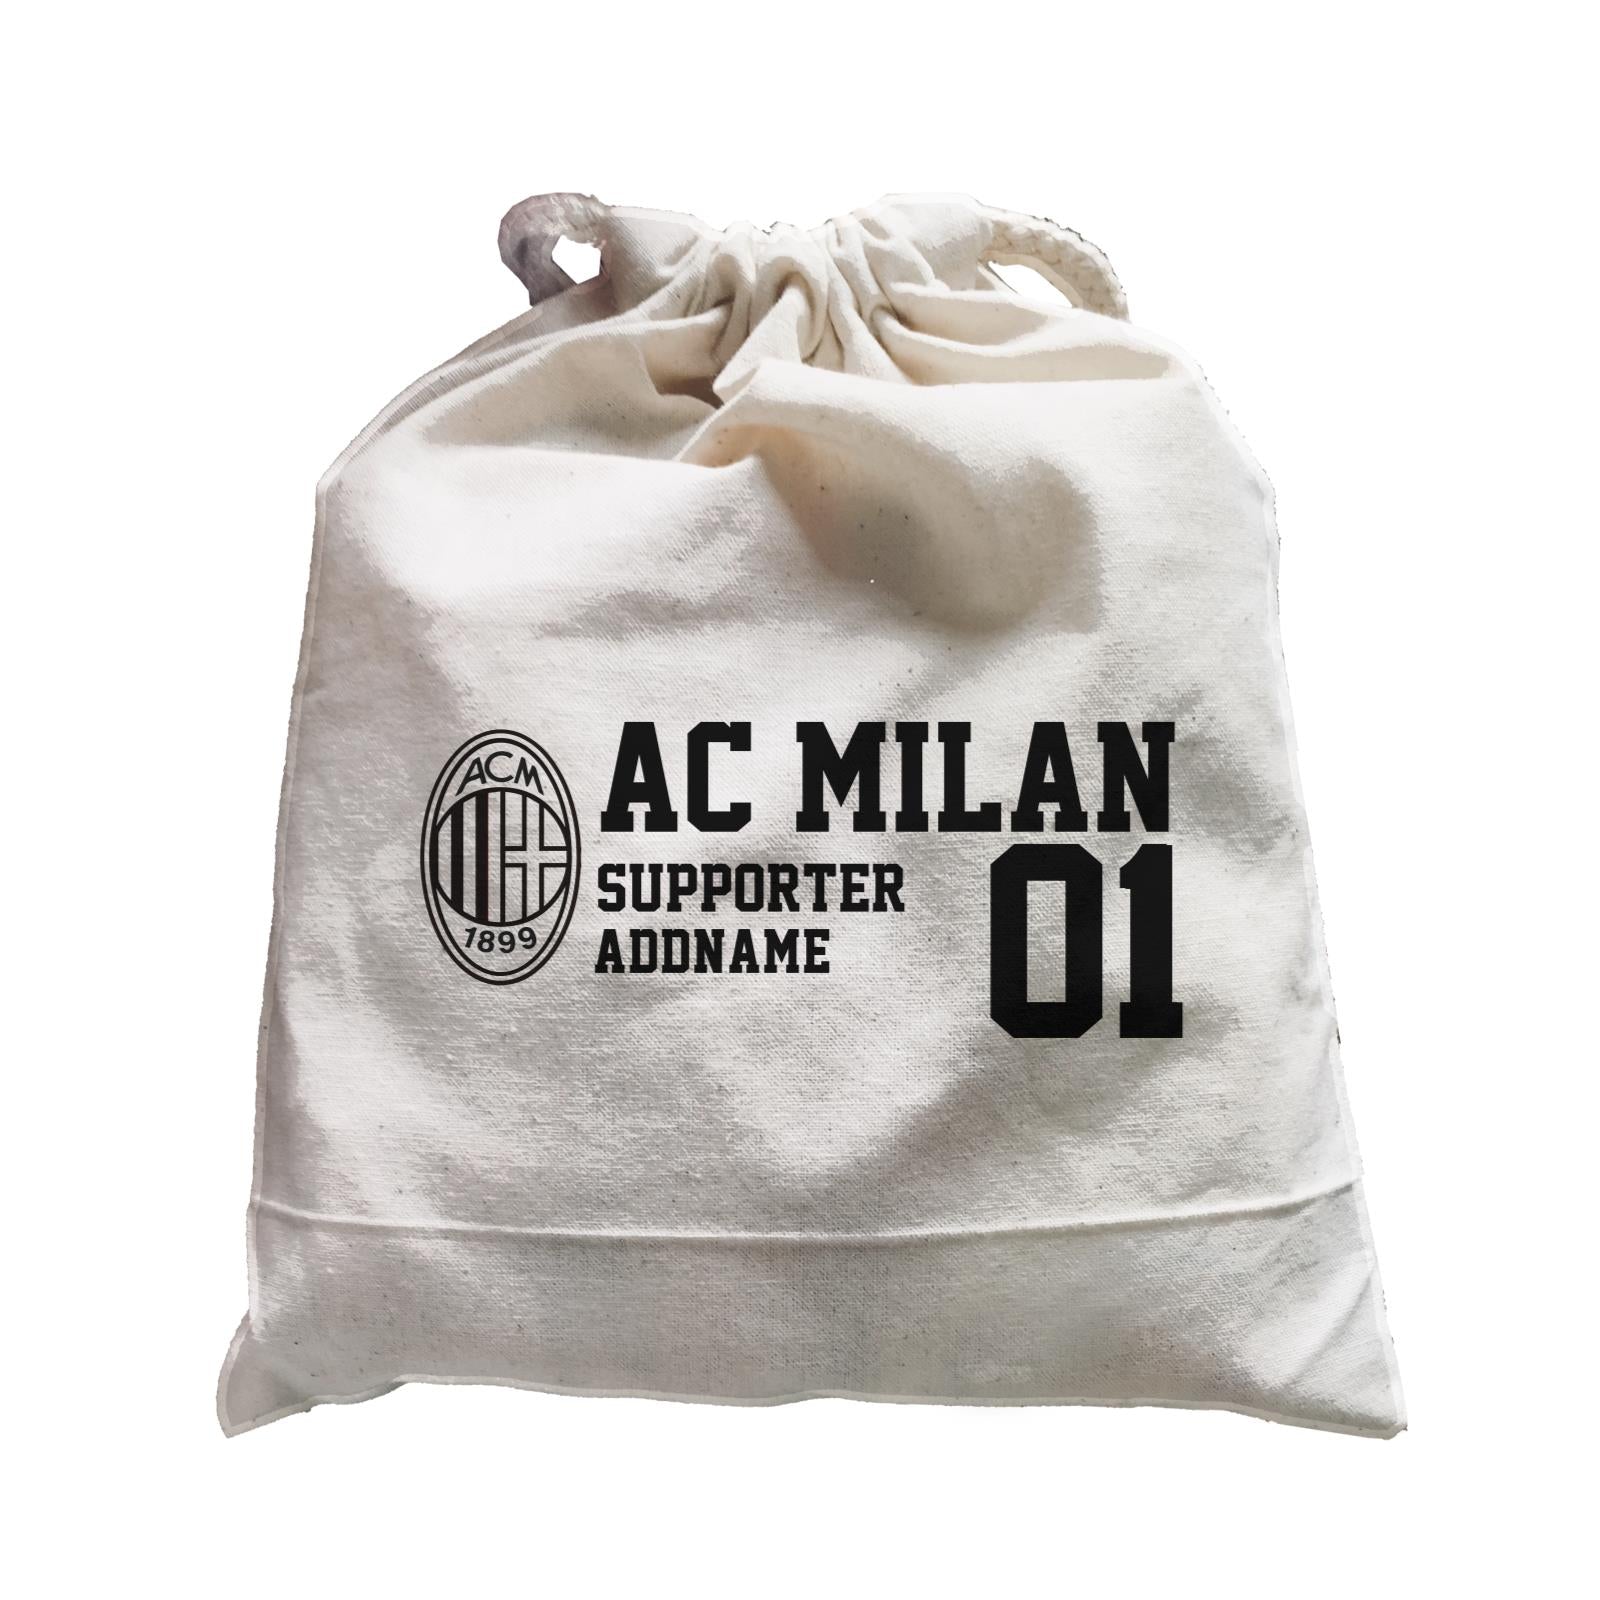 AC Milan Football Supporter Accessories Addname Satchel